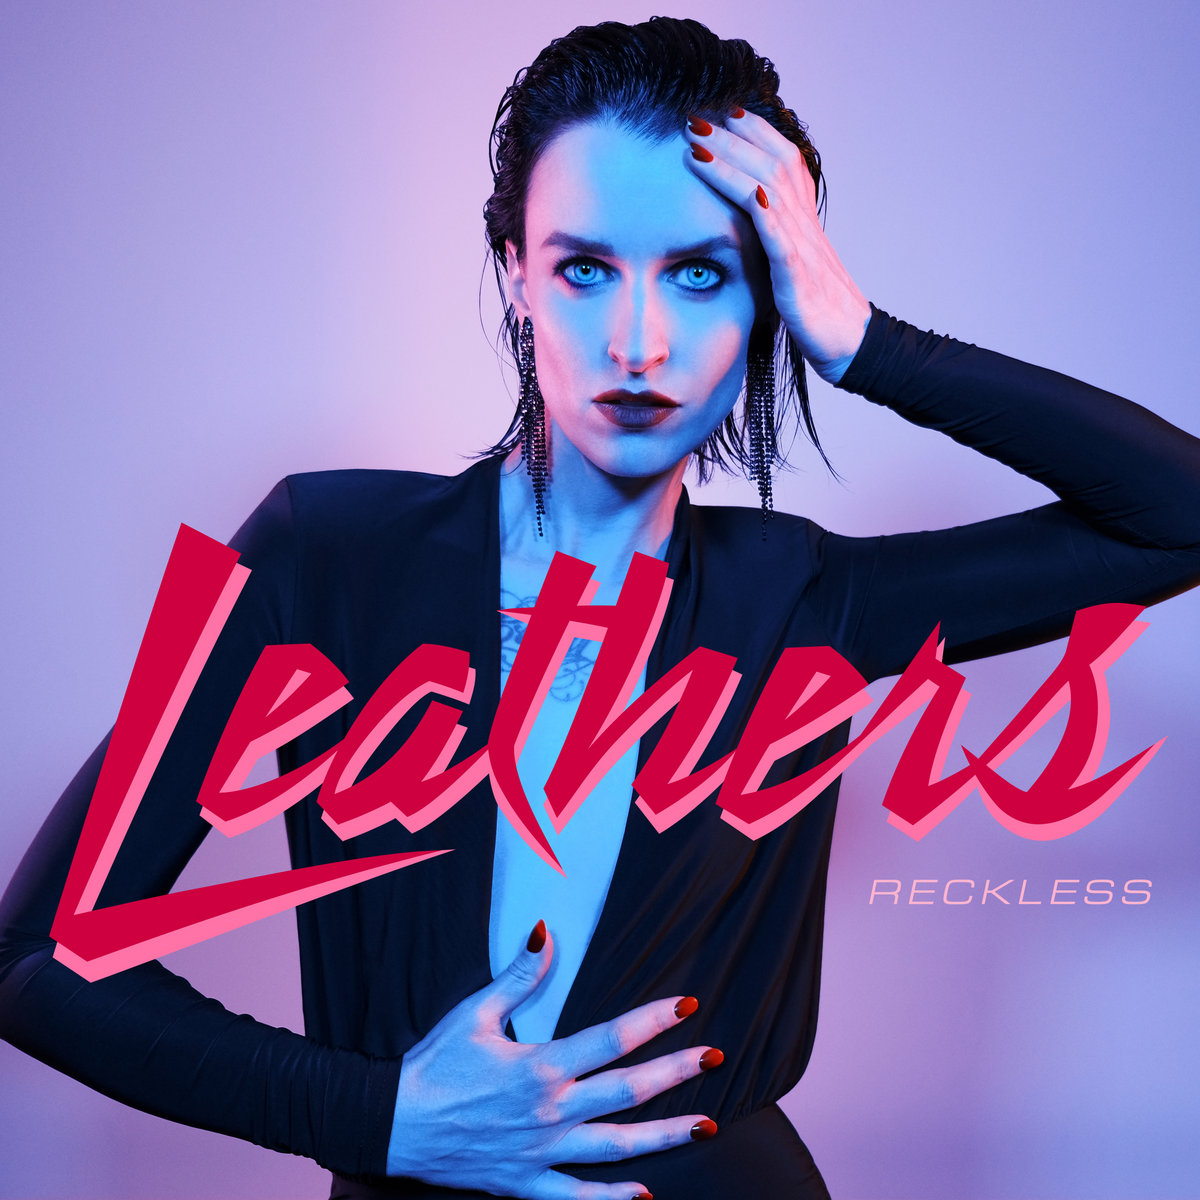 Single of the week – Leathers – Reckless